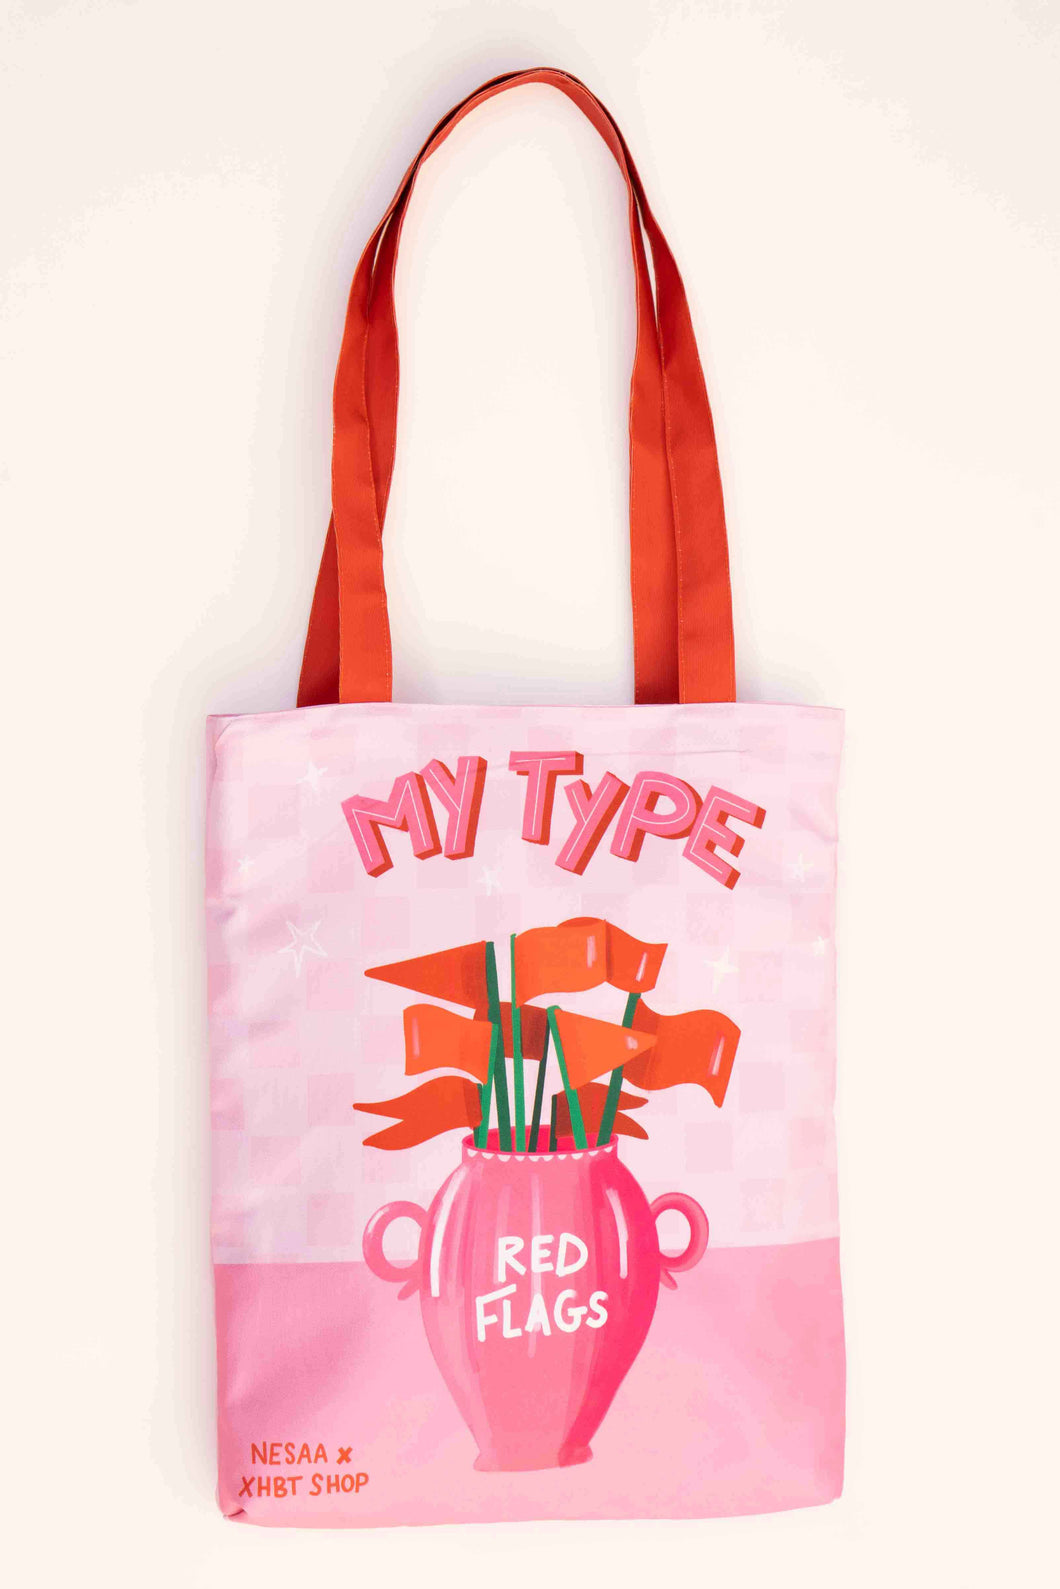 Red Flags - Tote Bag (Nesaa x Xhbt)